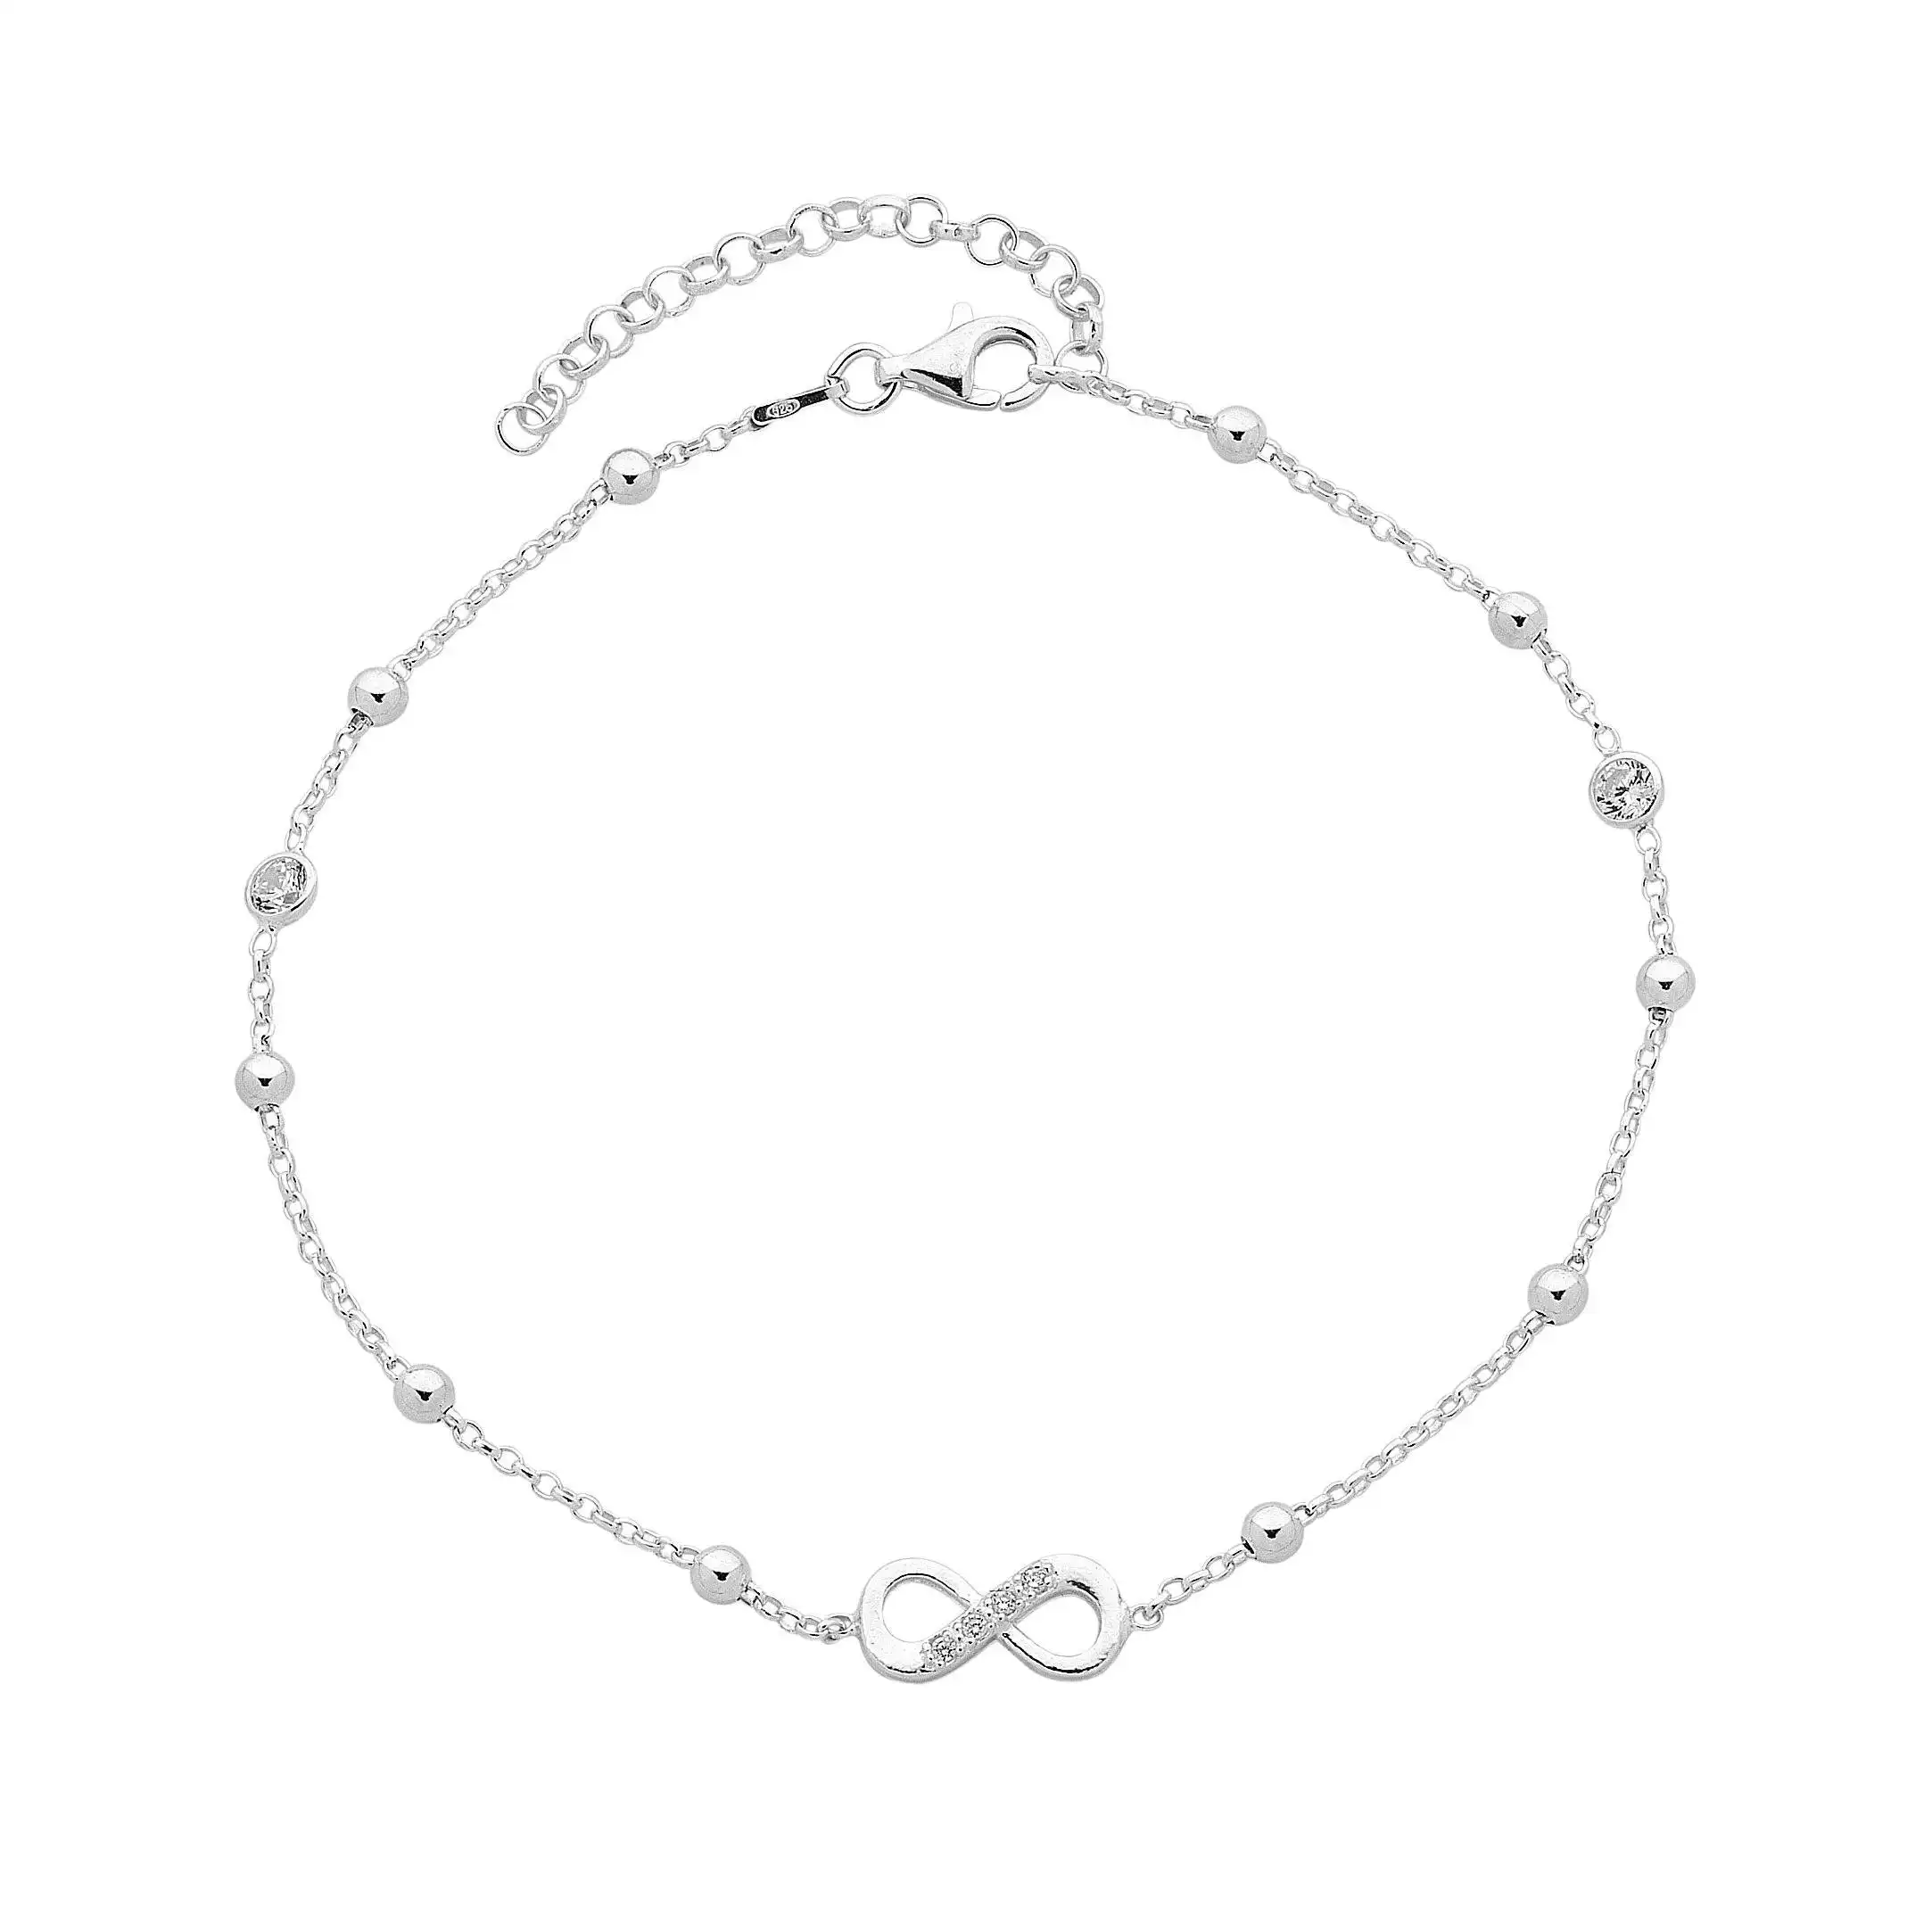 27cm Sterling Silver Infinity Anklet